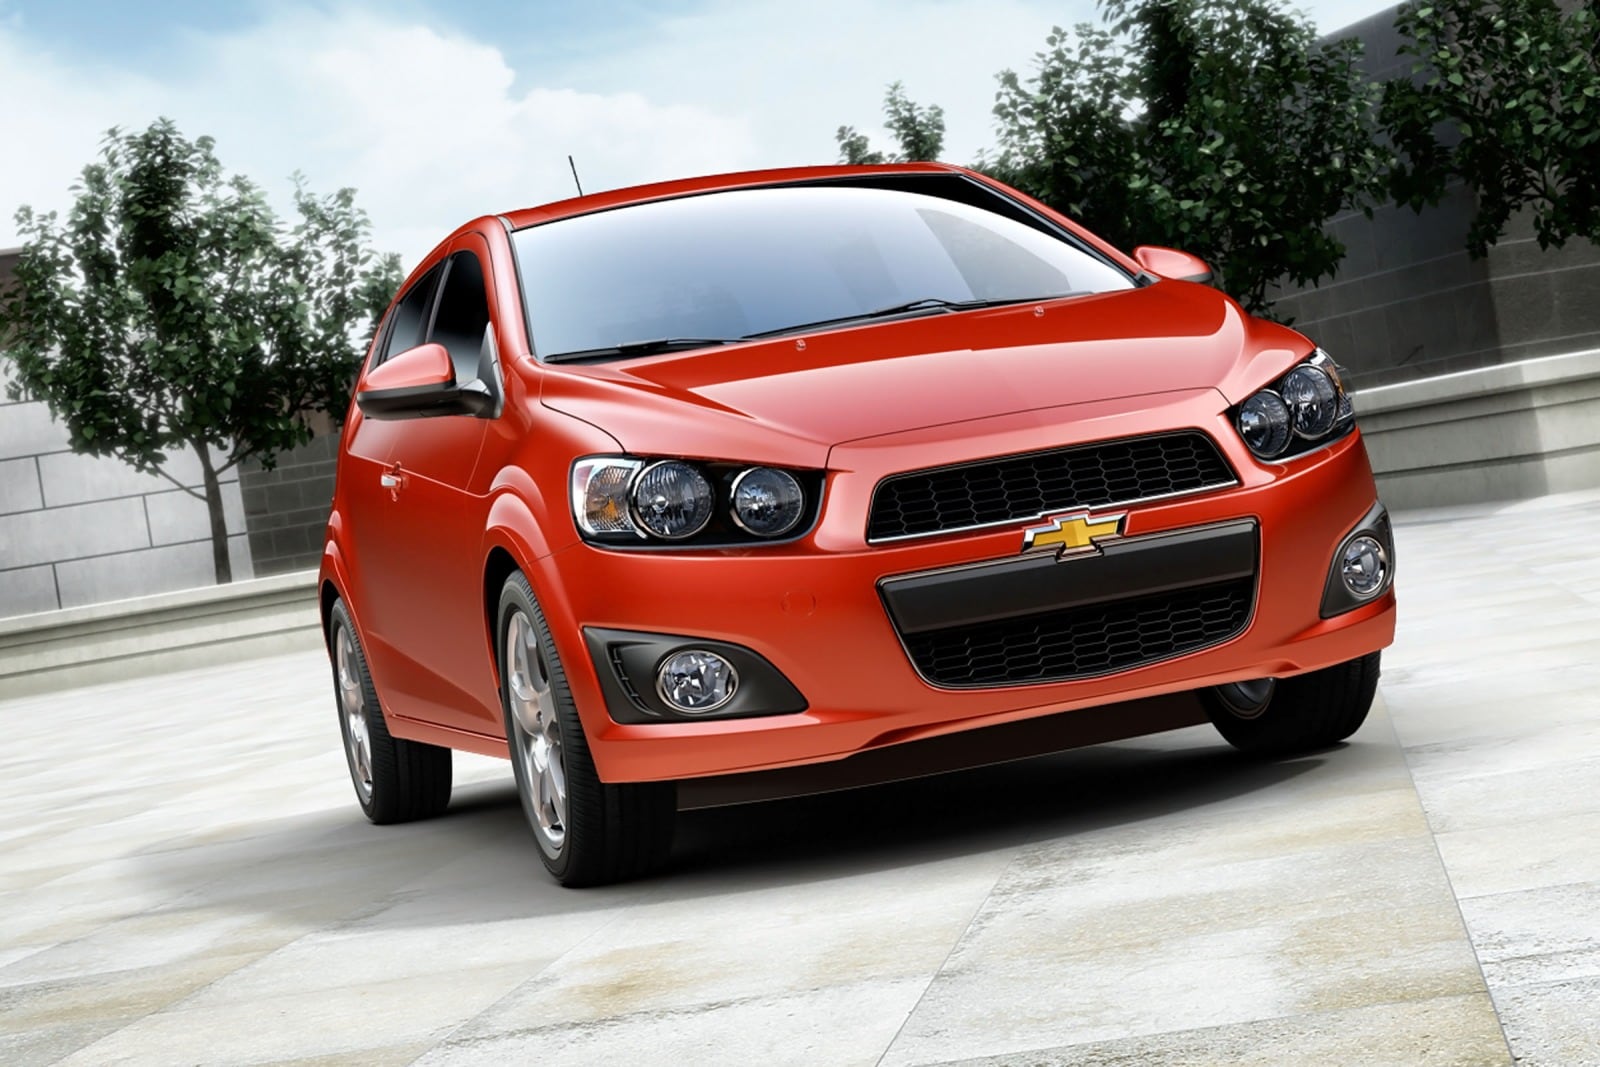 2013 Chevy Sonic Review & Ratings | Edmunds